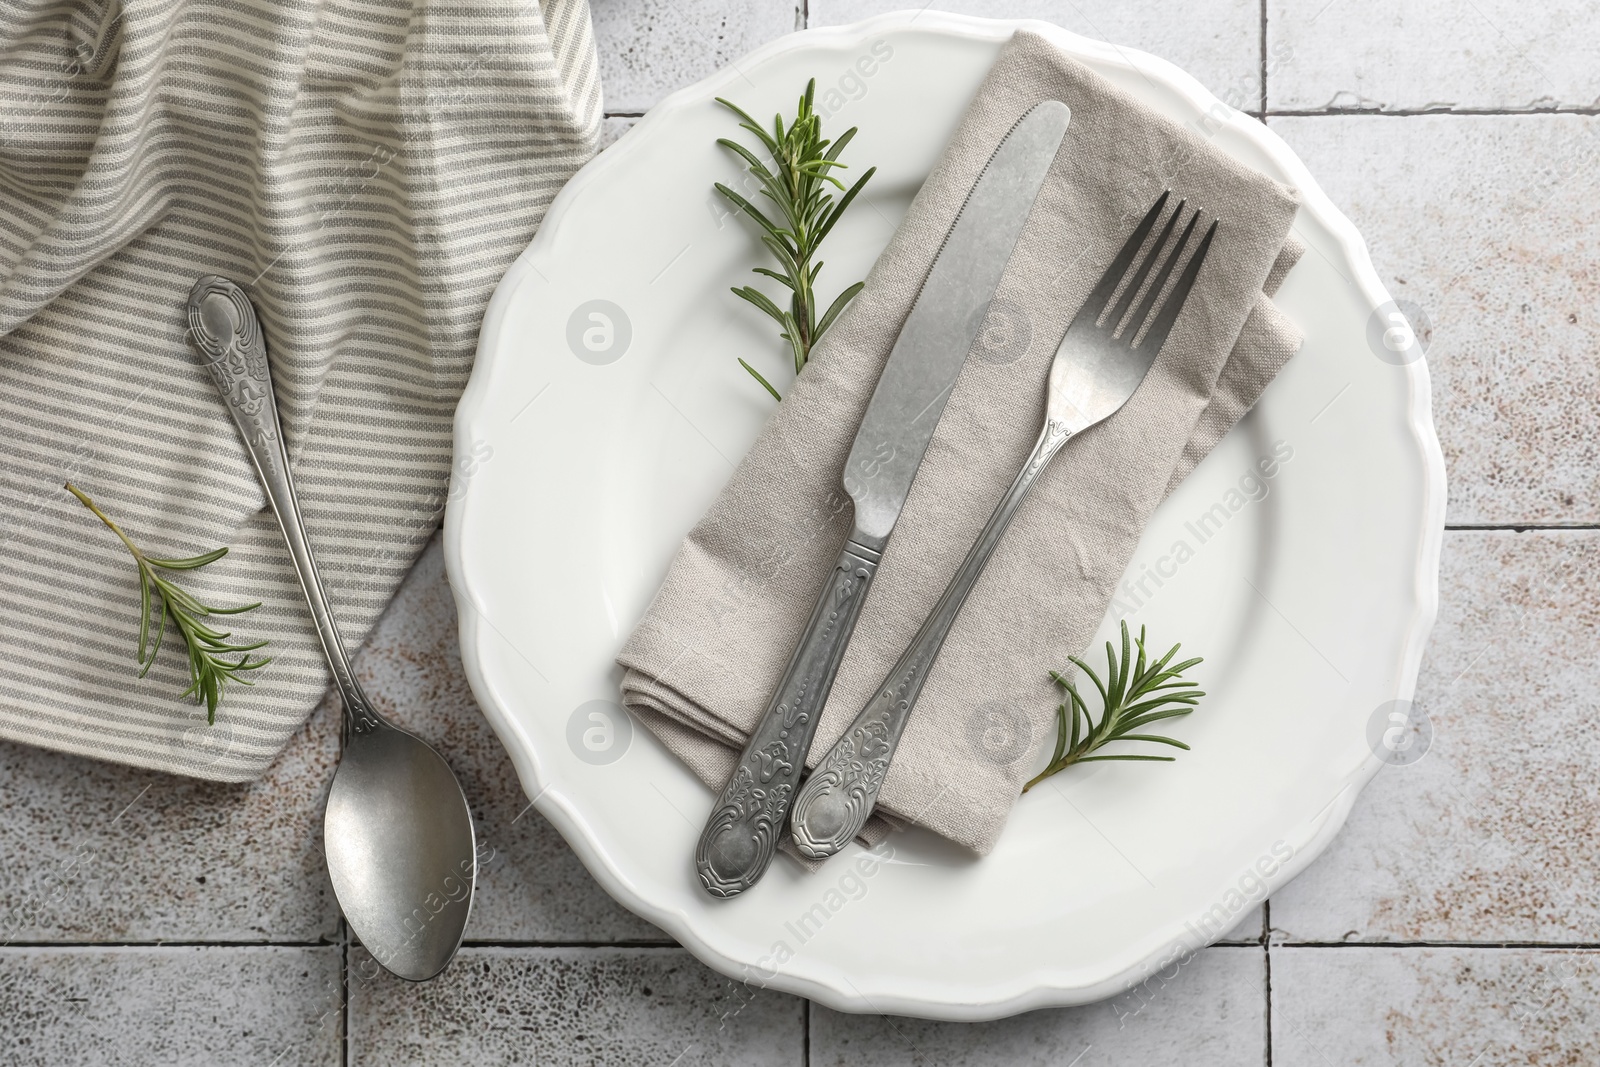 Photo of Stylish setting with cutlery, napkin, rosemary and plate on light tiled table, top view